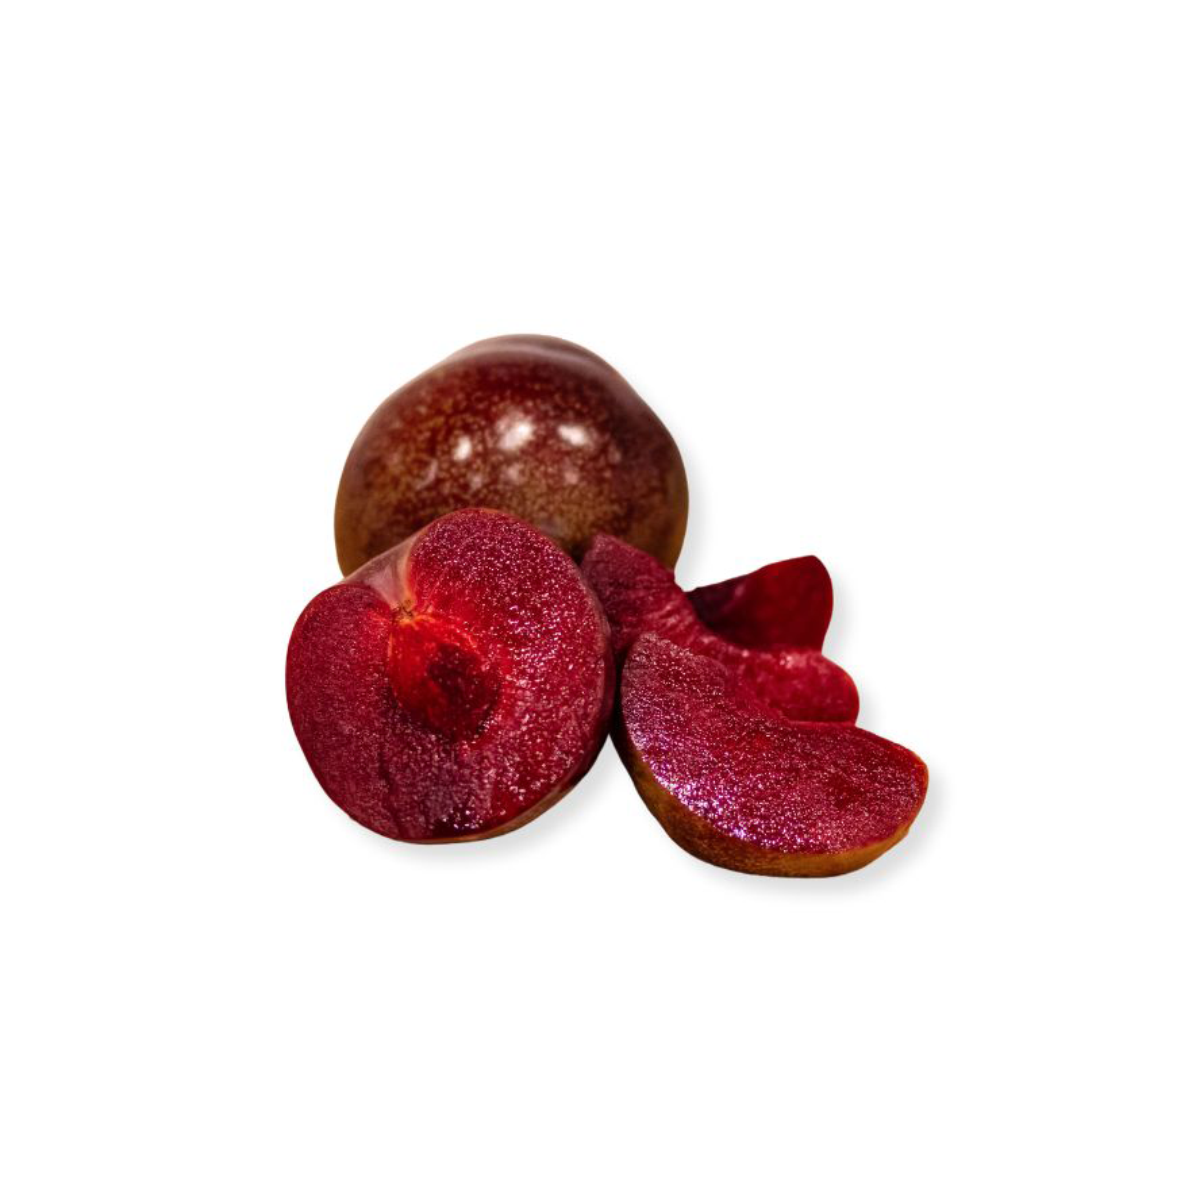 Family Tree Farms Red Starburst Plumcots 13 lb Pack